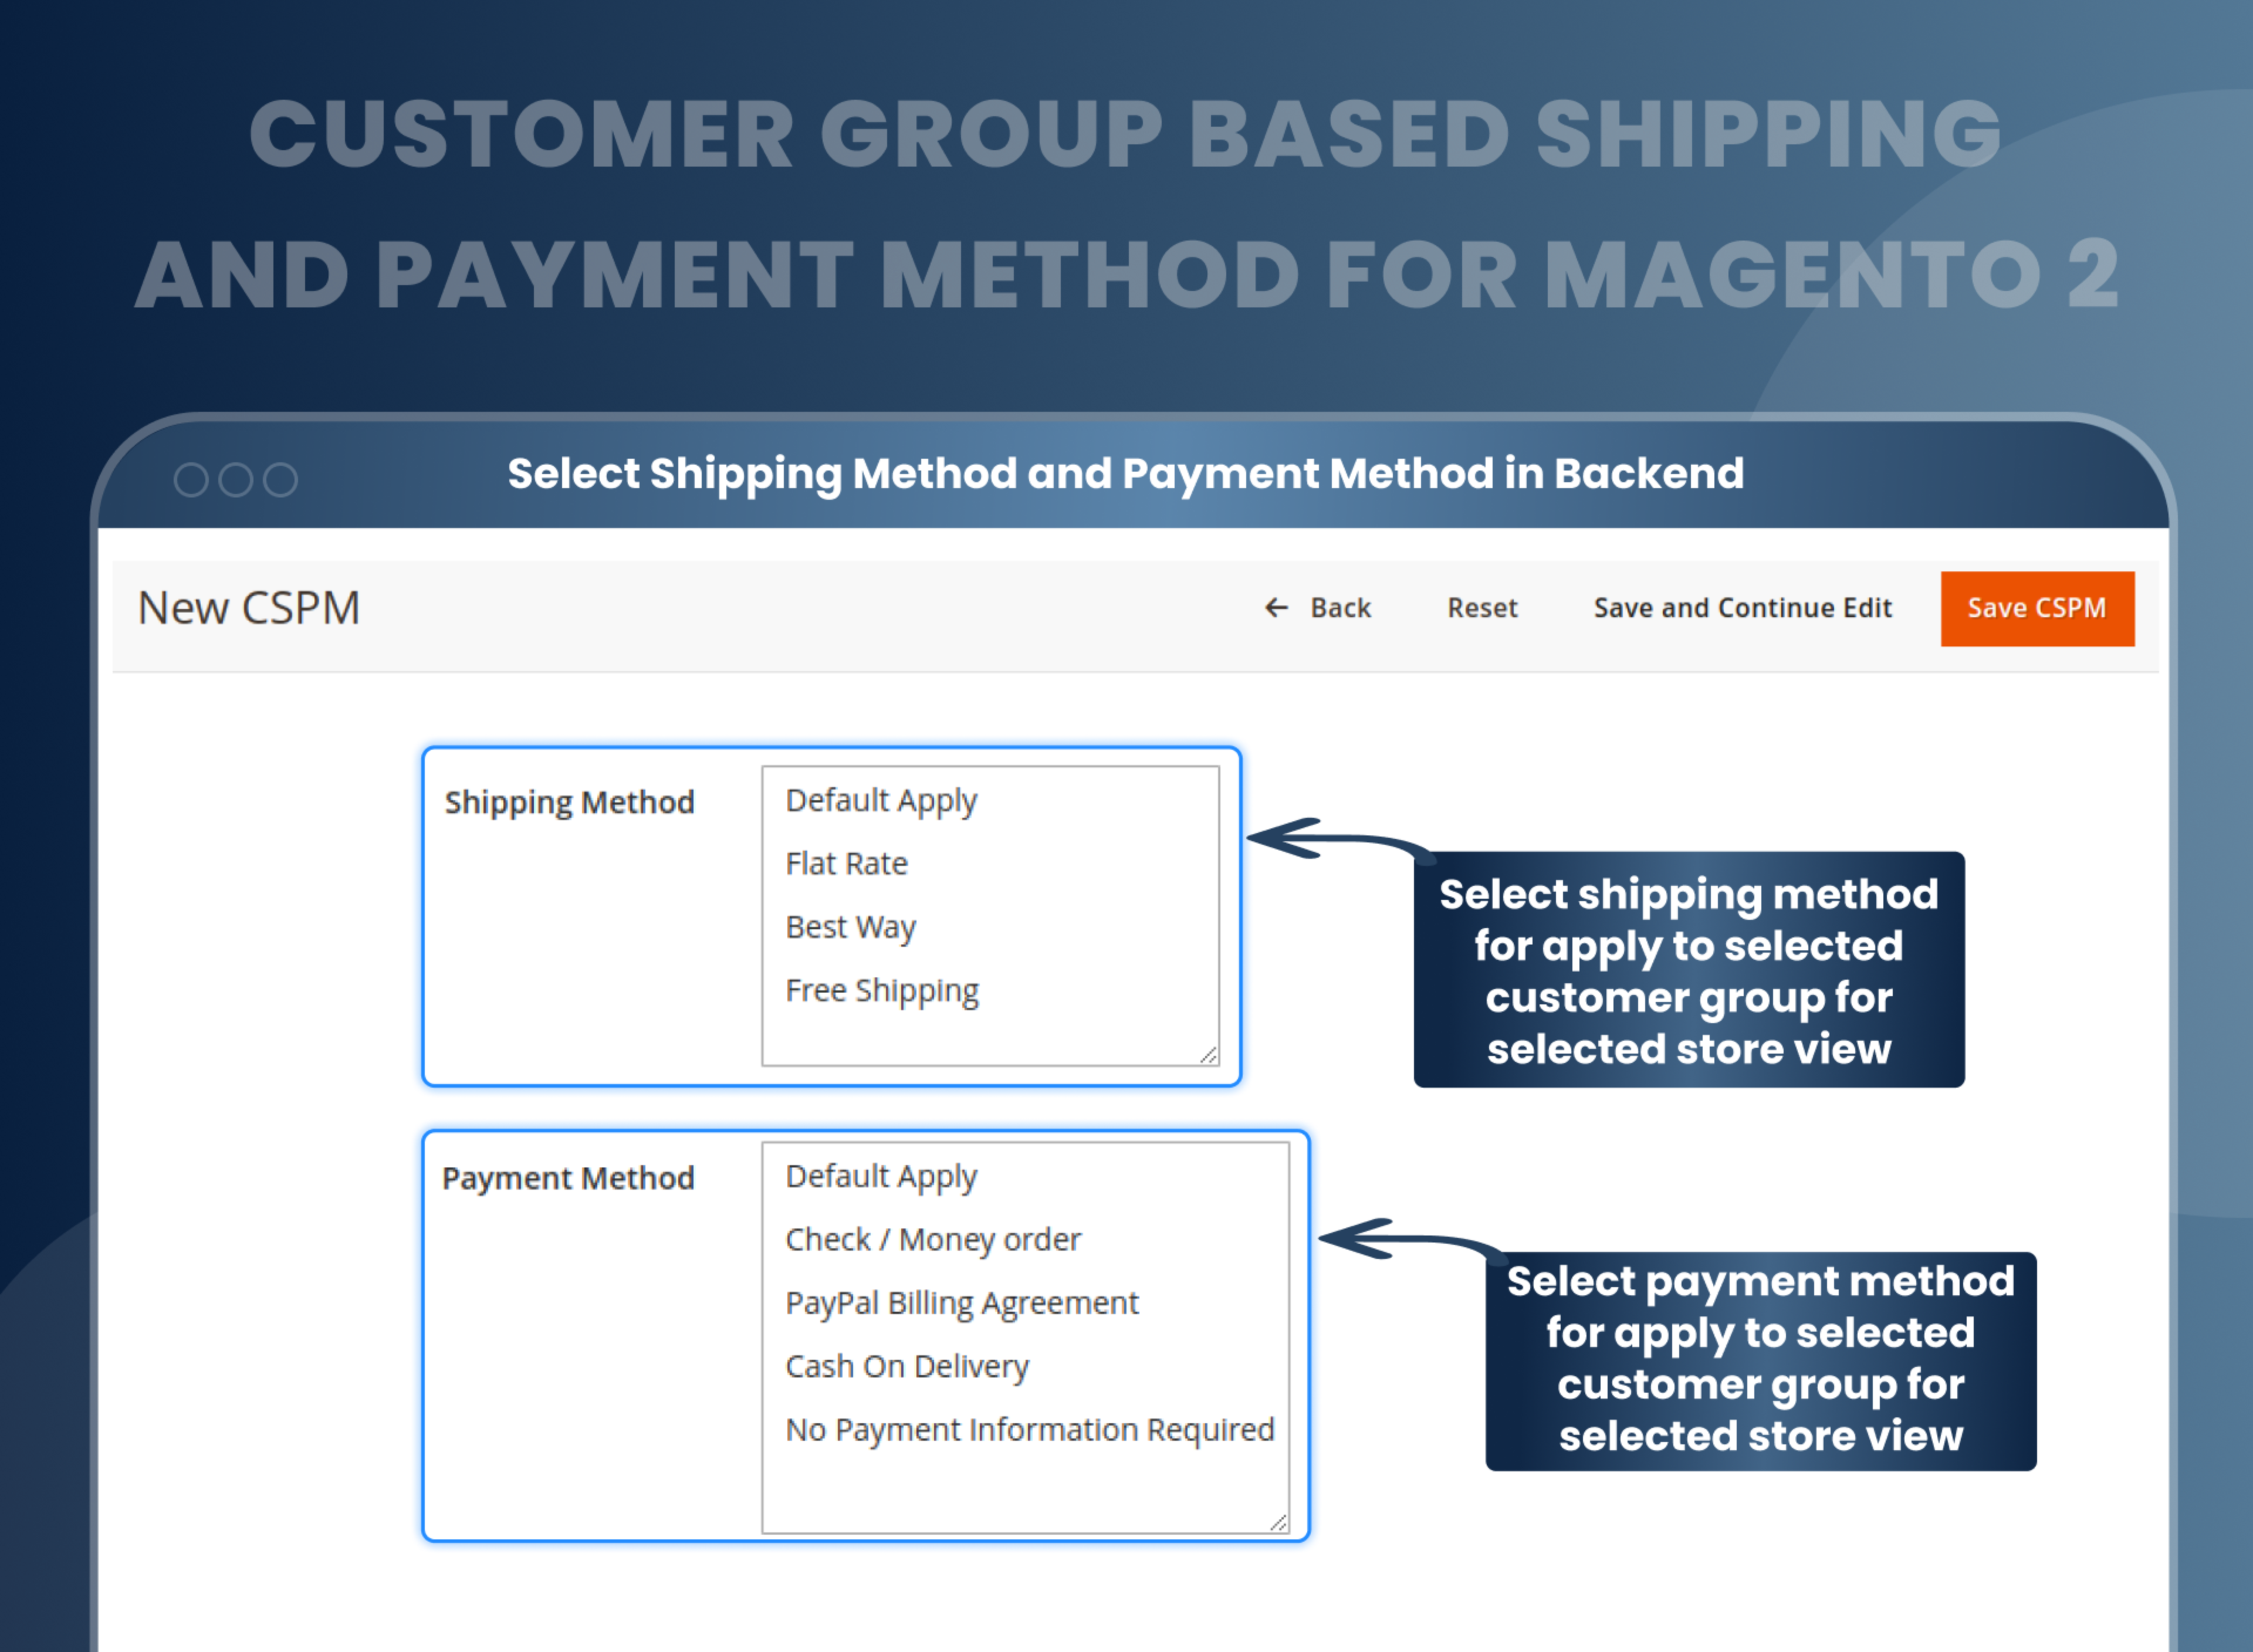 Select Shipping Method and Payment Method in Backend